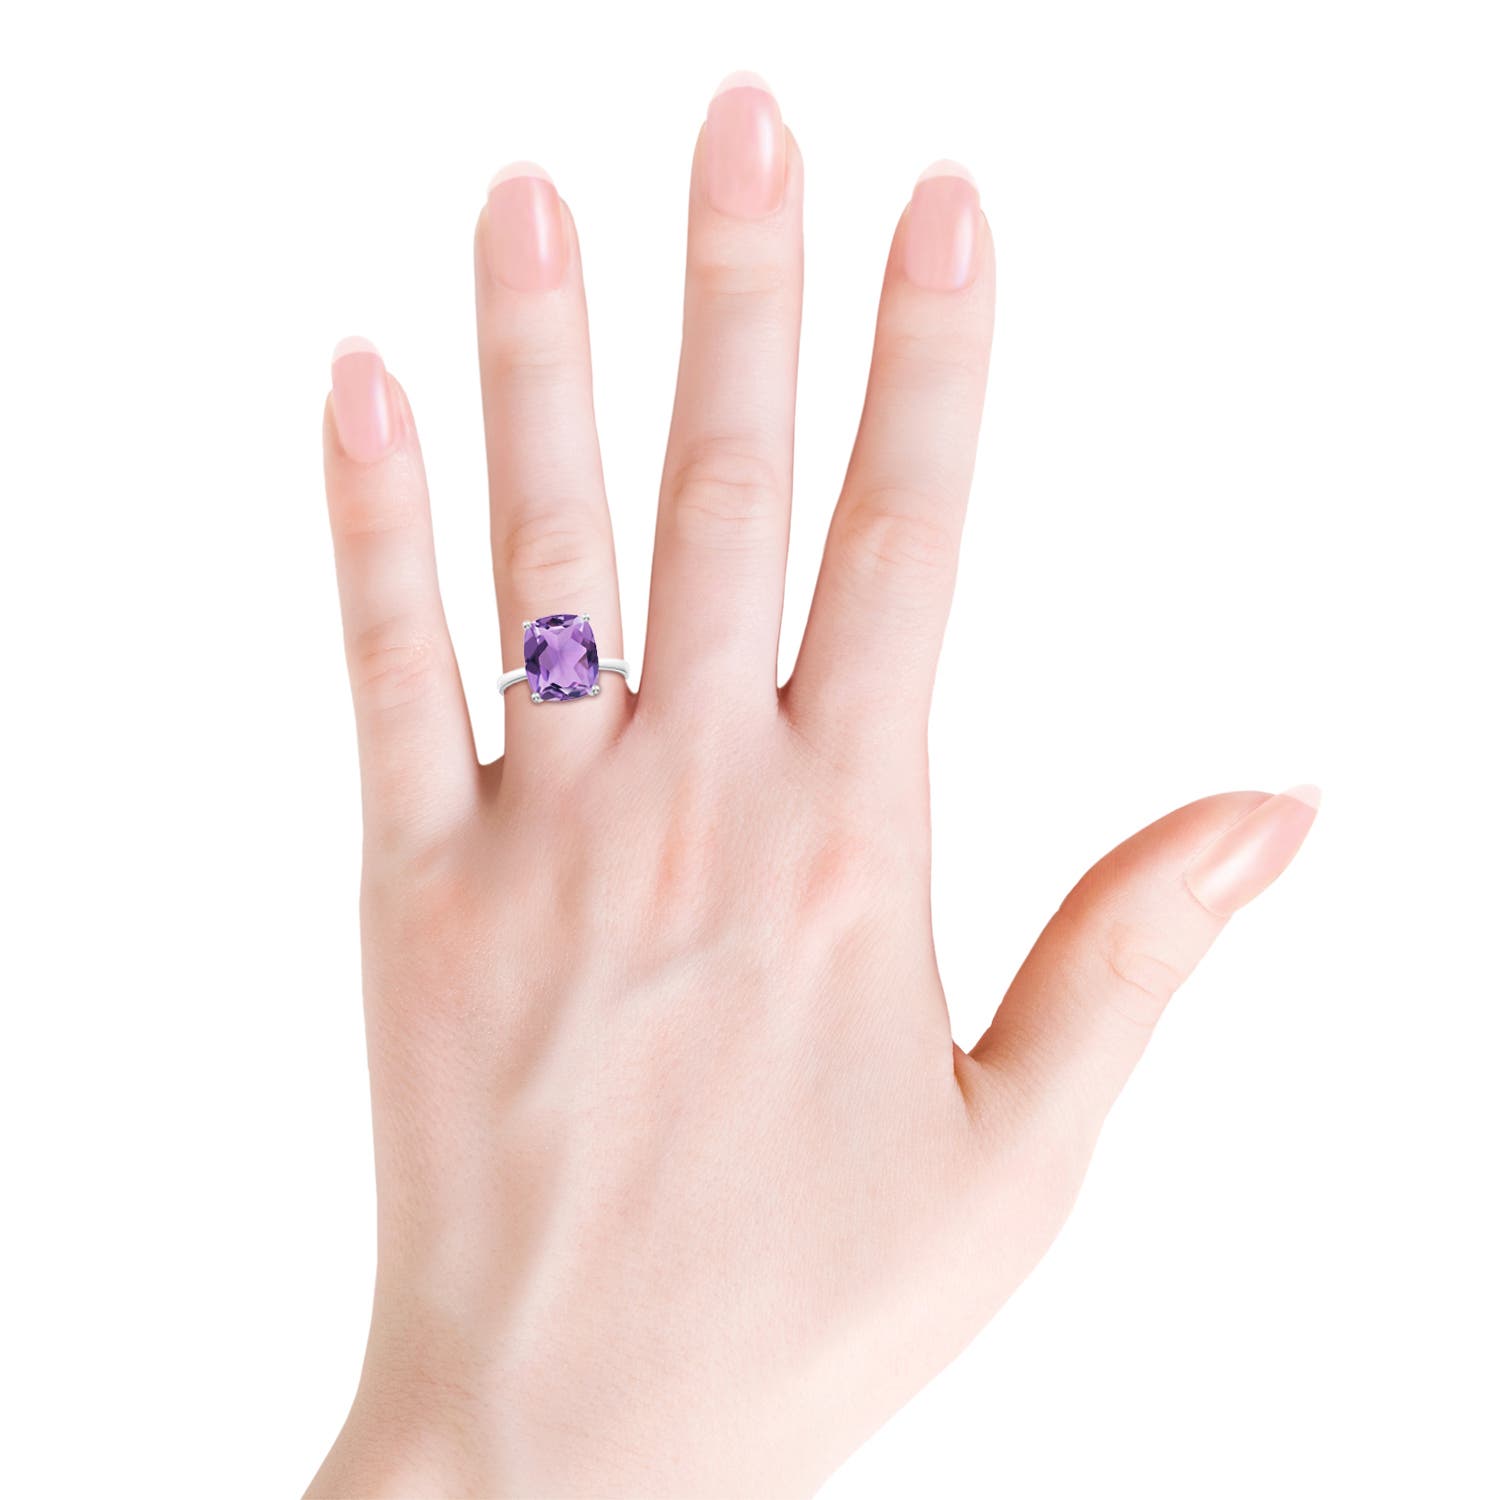 A - Amethyst / 4.6 CT / 14 KT White Gold